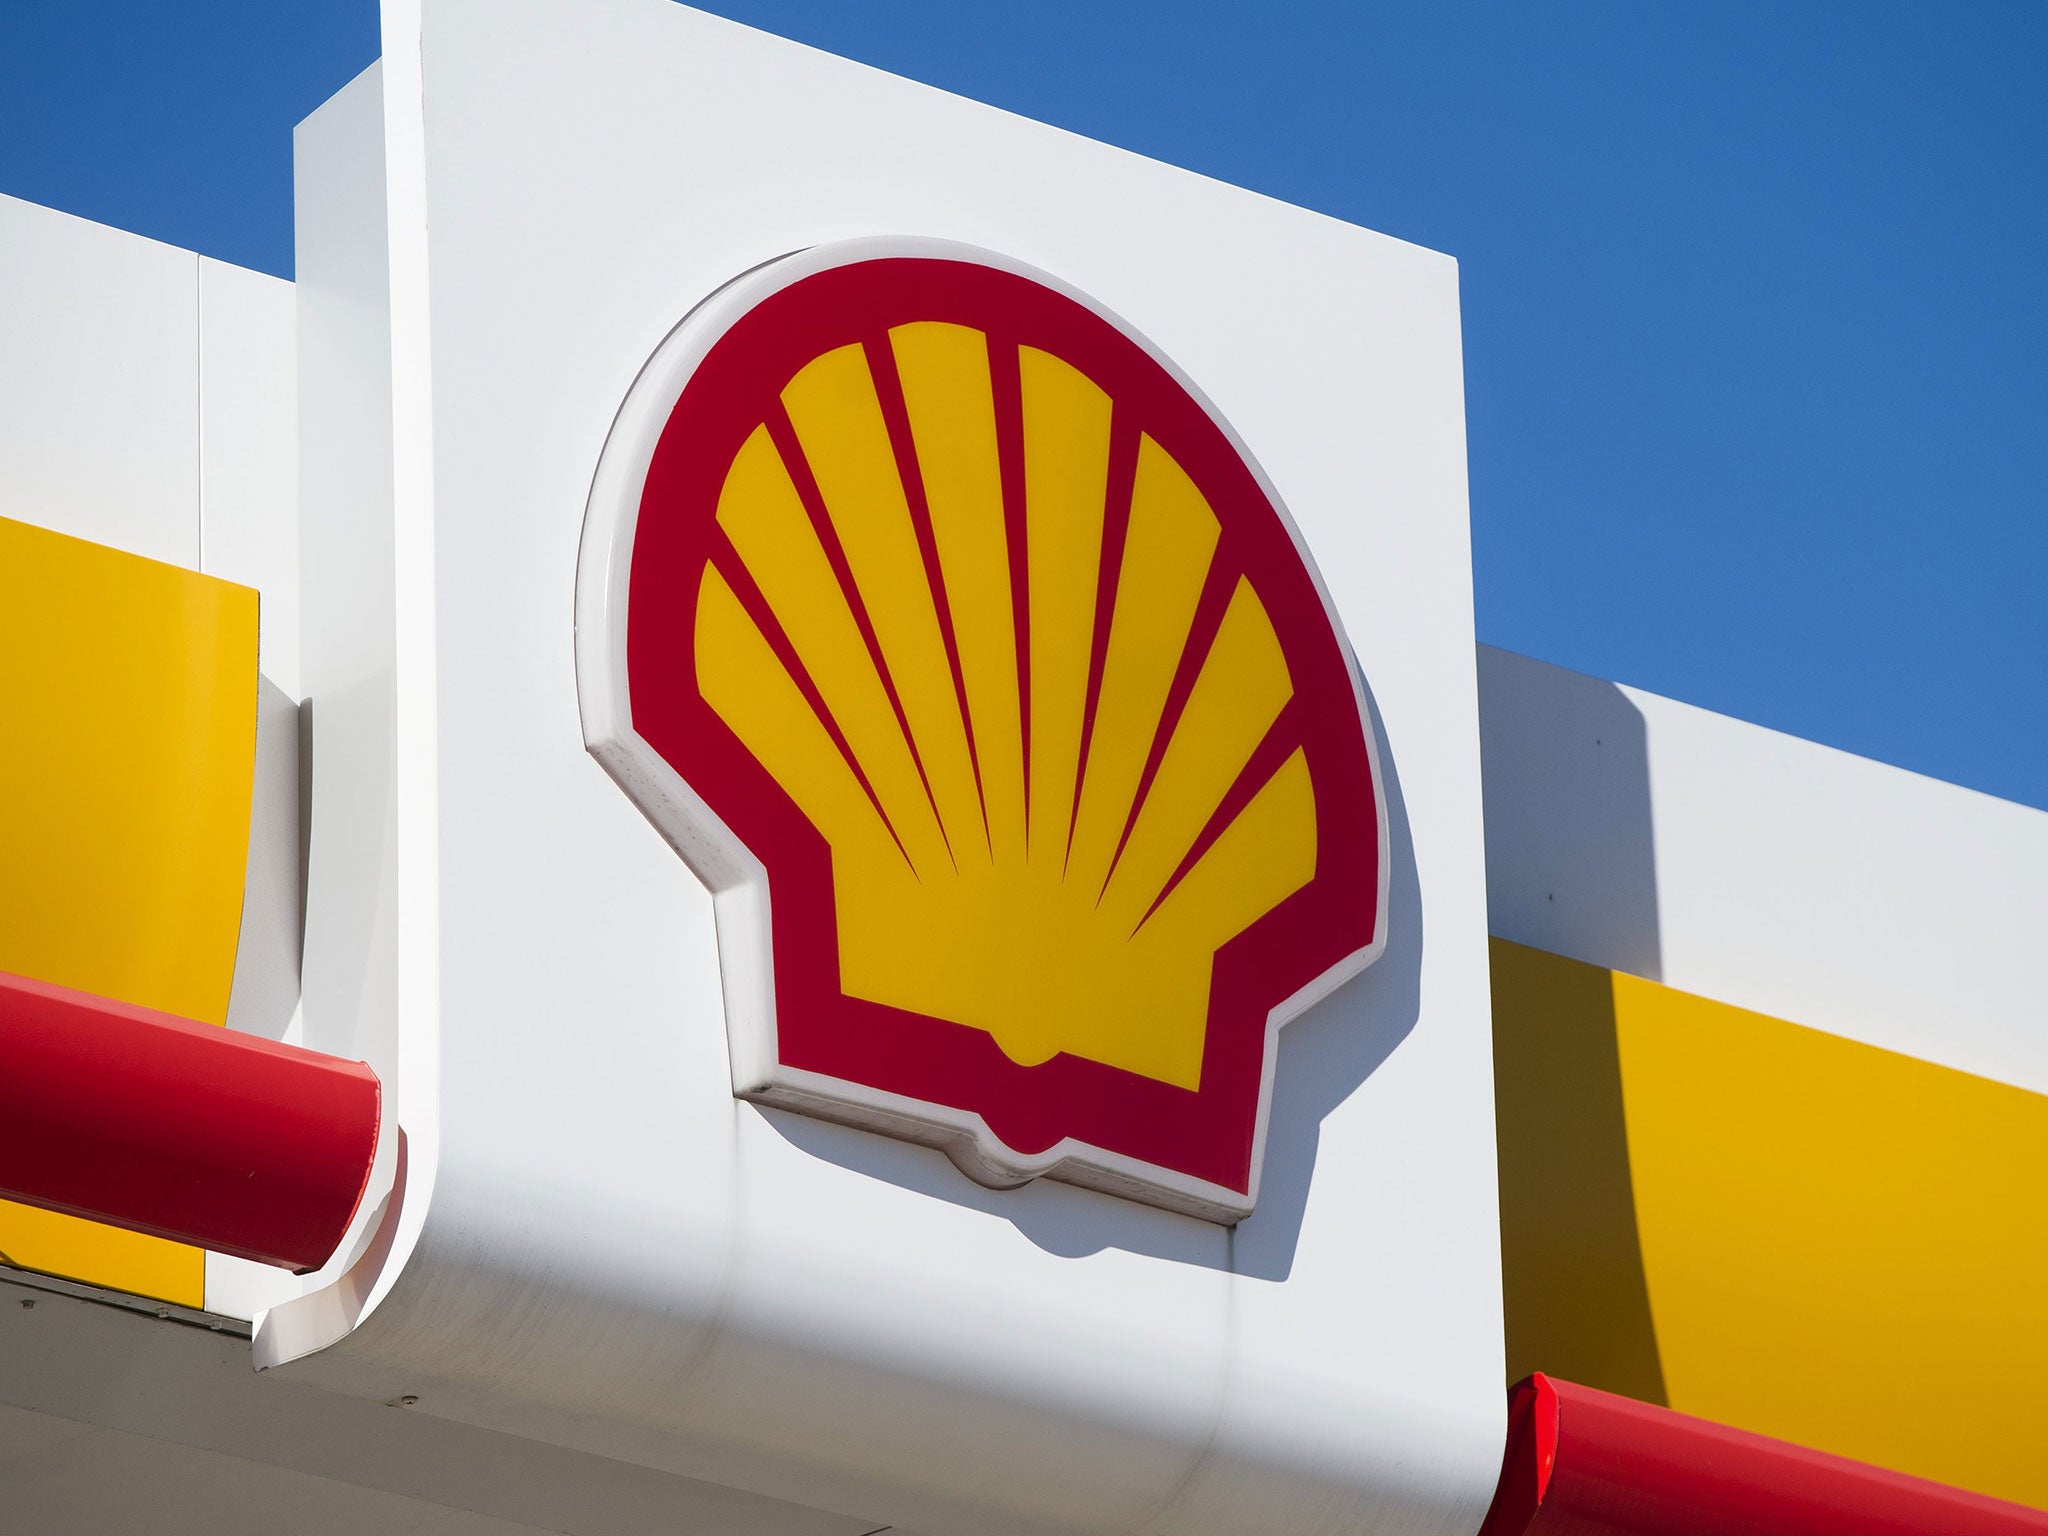 Shell recently agreed to buy energy supplier First Utility in a move that will see it become a direct energy provider to 825,000 British homes